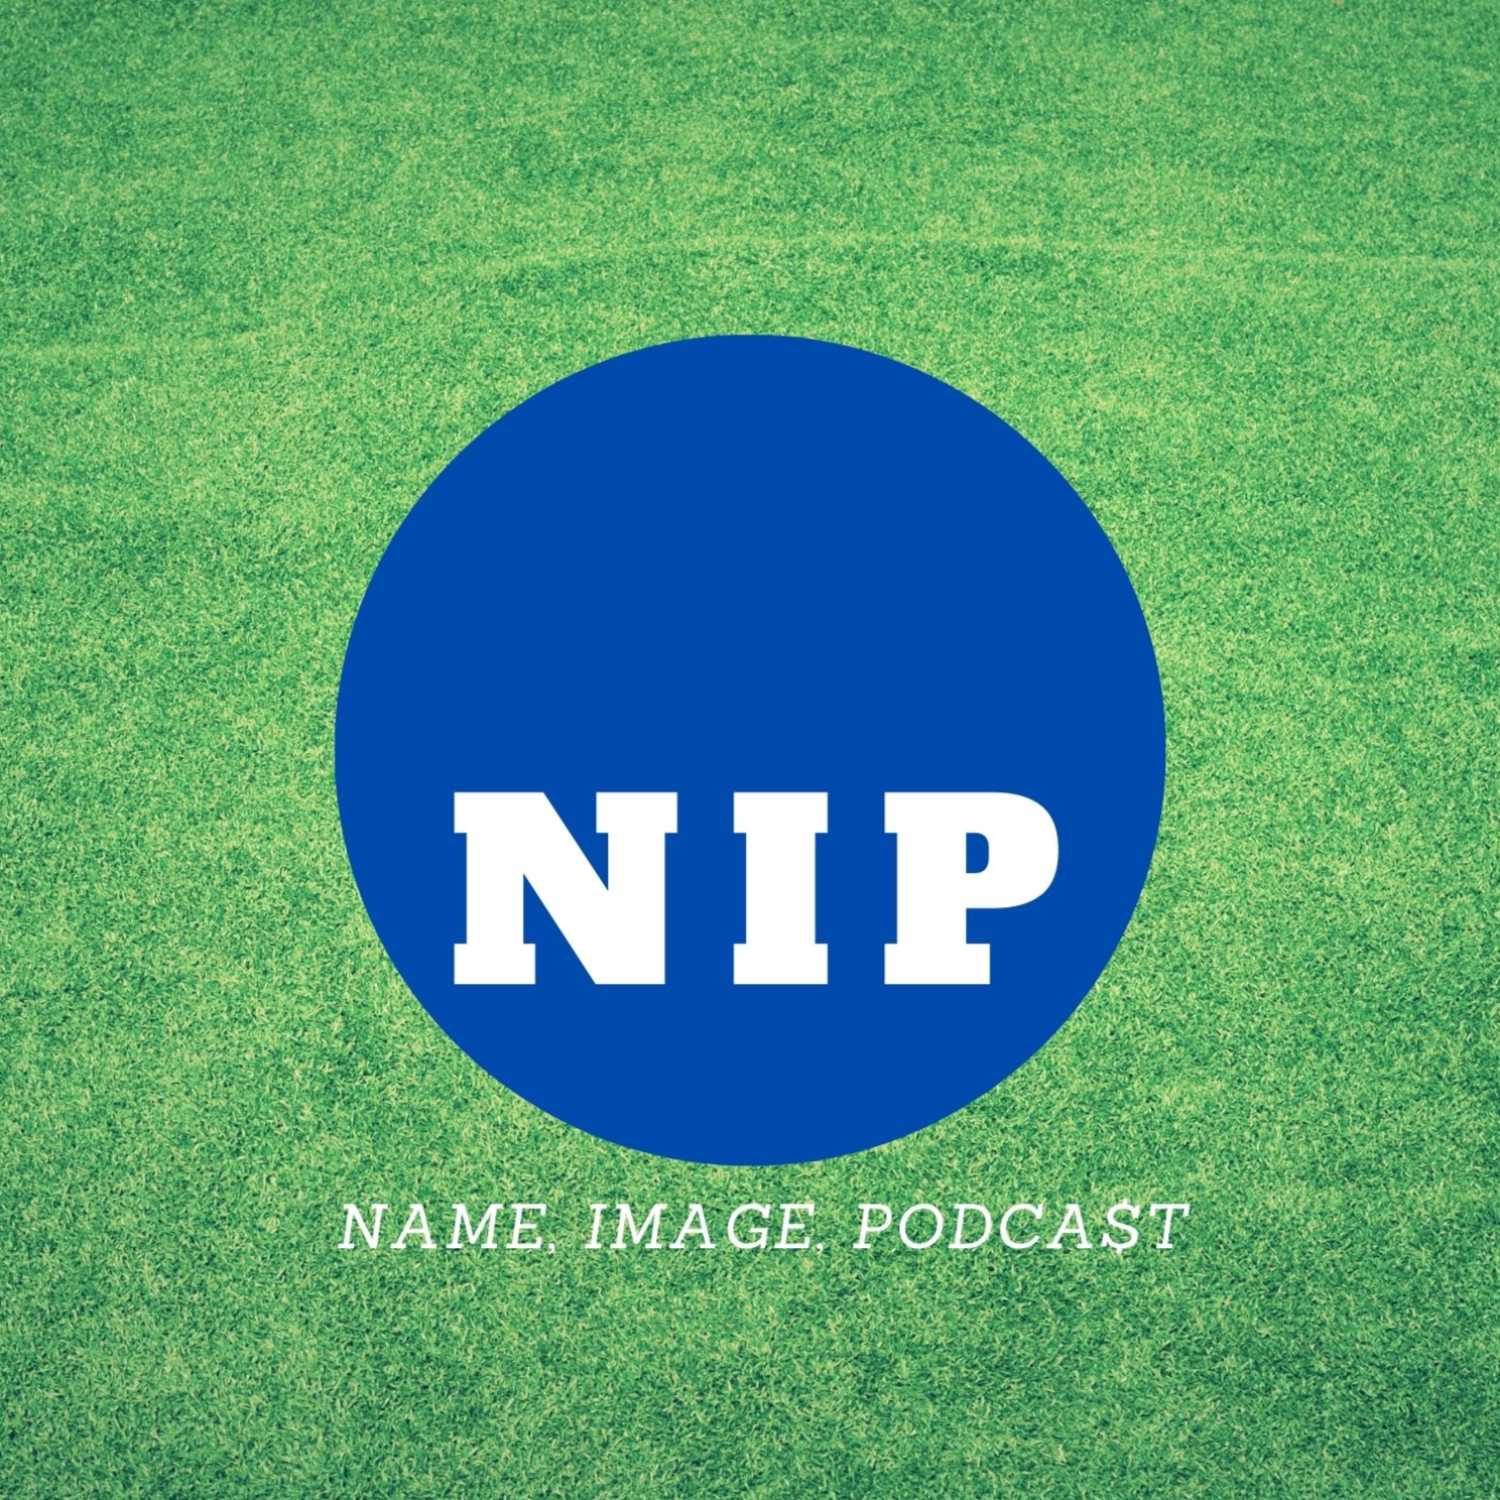 Name, Image, Podcast